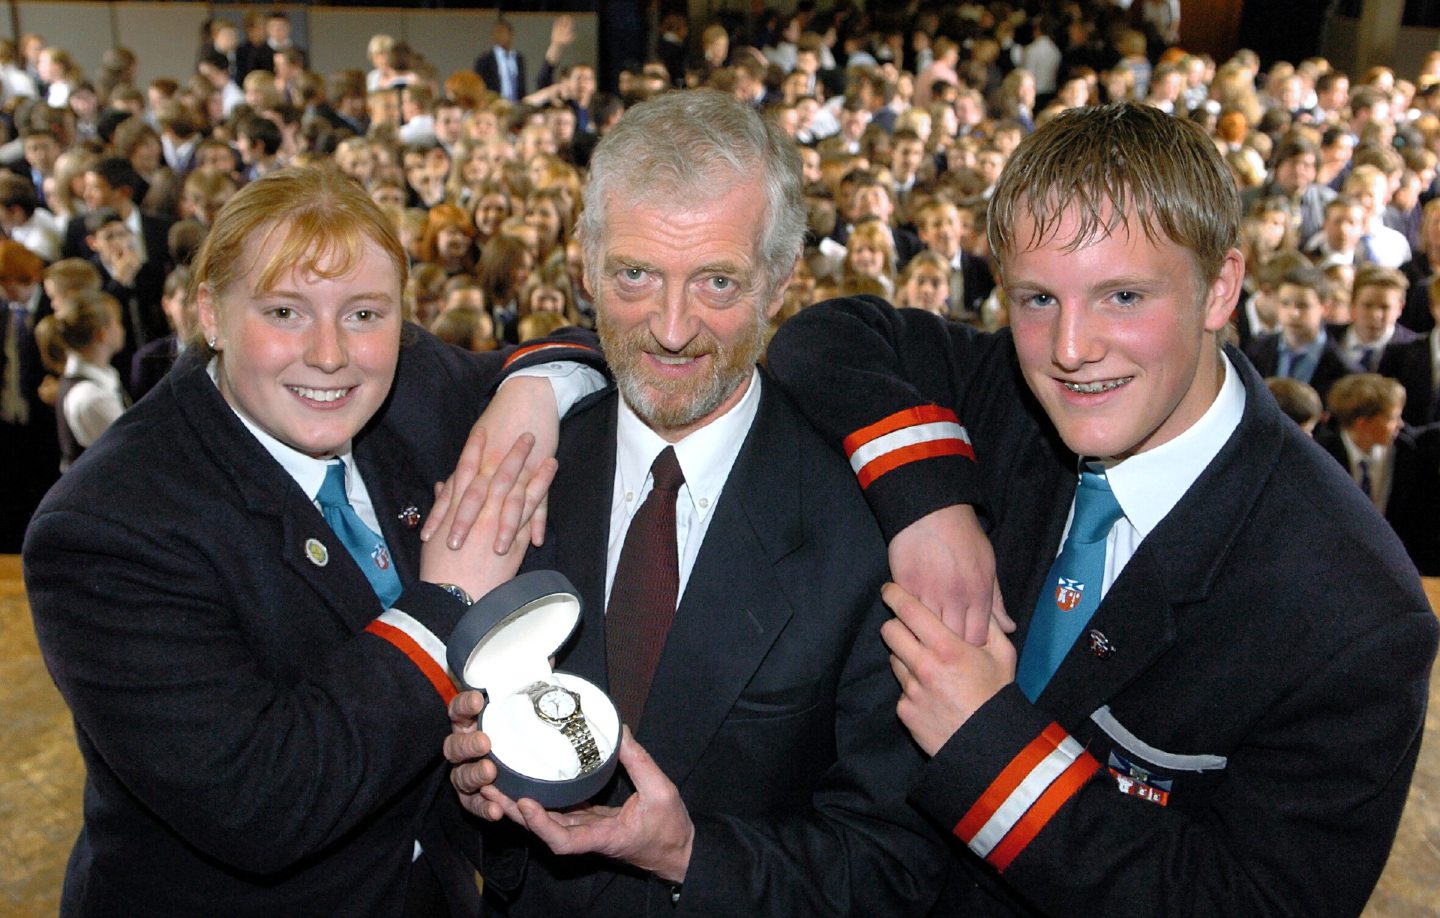  Retiring Rector of Aberdeen Grammar School Bill Johnston with a watch which was a gift from the pupils, pictured with head boy Peter Cross and deputy head girl Fiona Taylor in 2004.